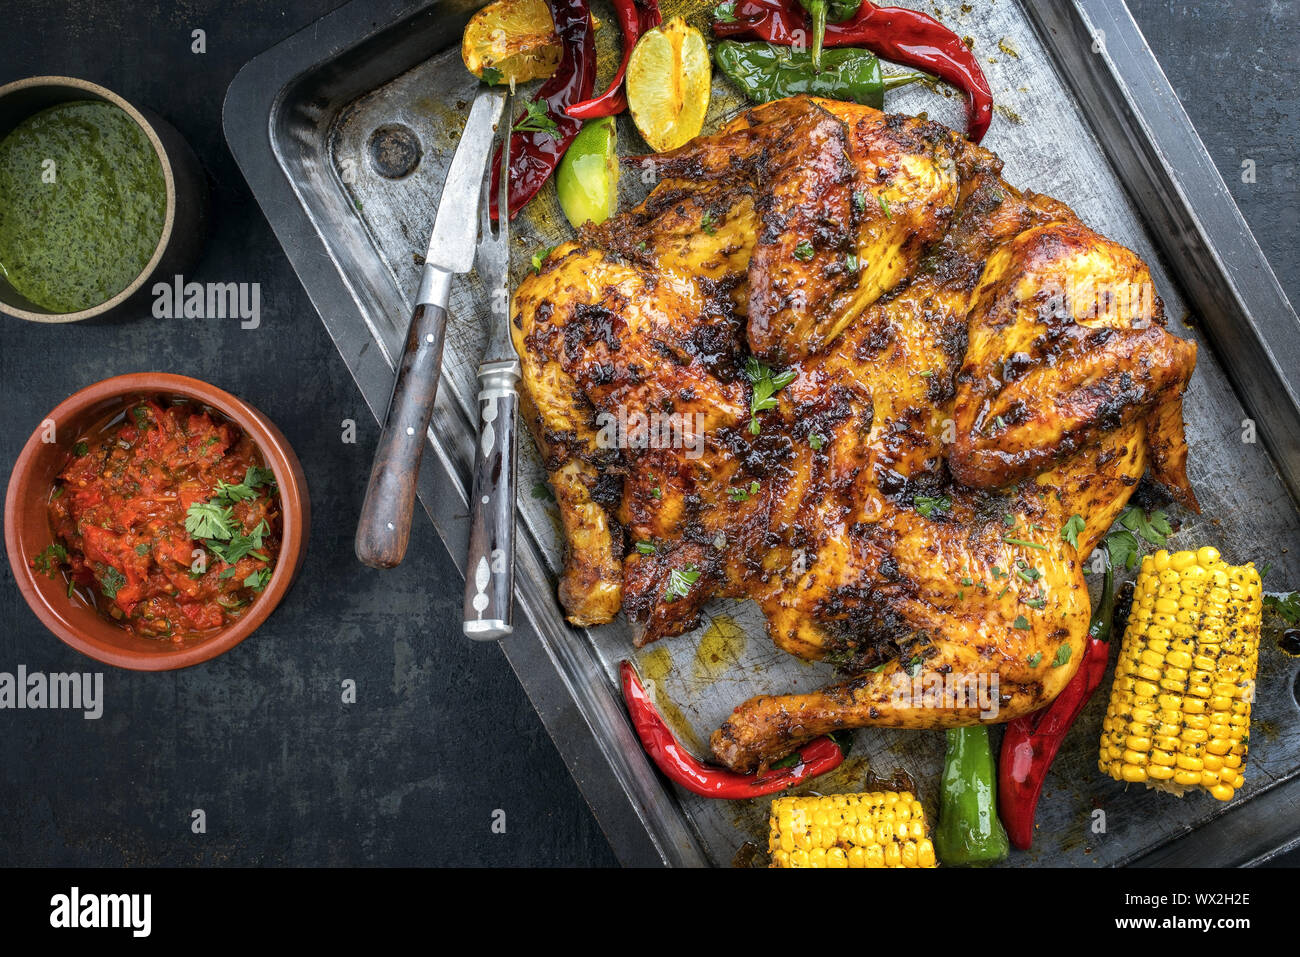 Spatchcocked barbecue chicken al mattone chili with chimichurri sauce and chili relish as top view on an old metal sheet Stock Photo